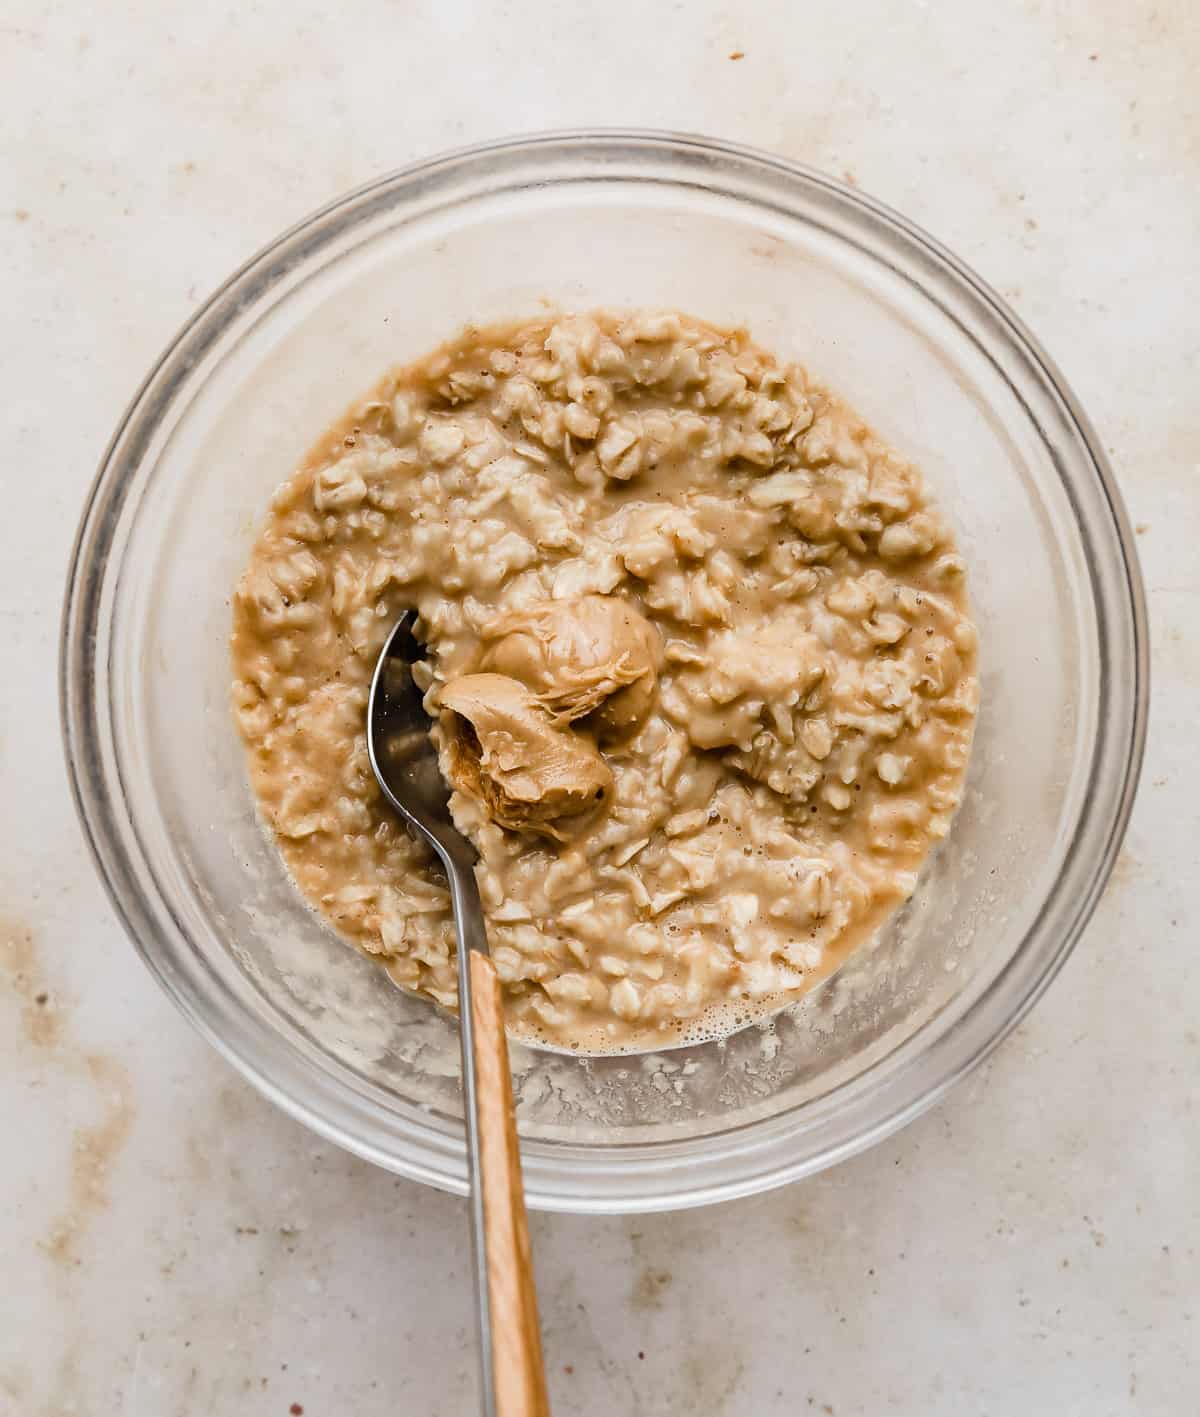 A glass bowl with tan oatmeal and a dollop of peanut butter in it.